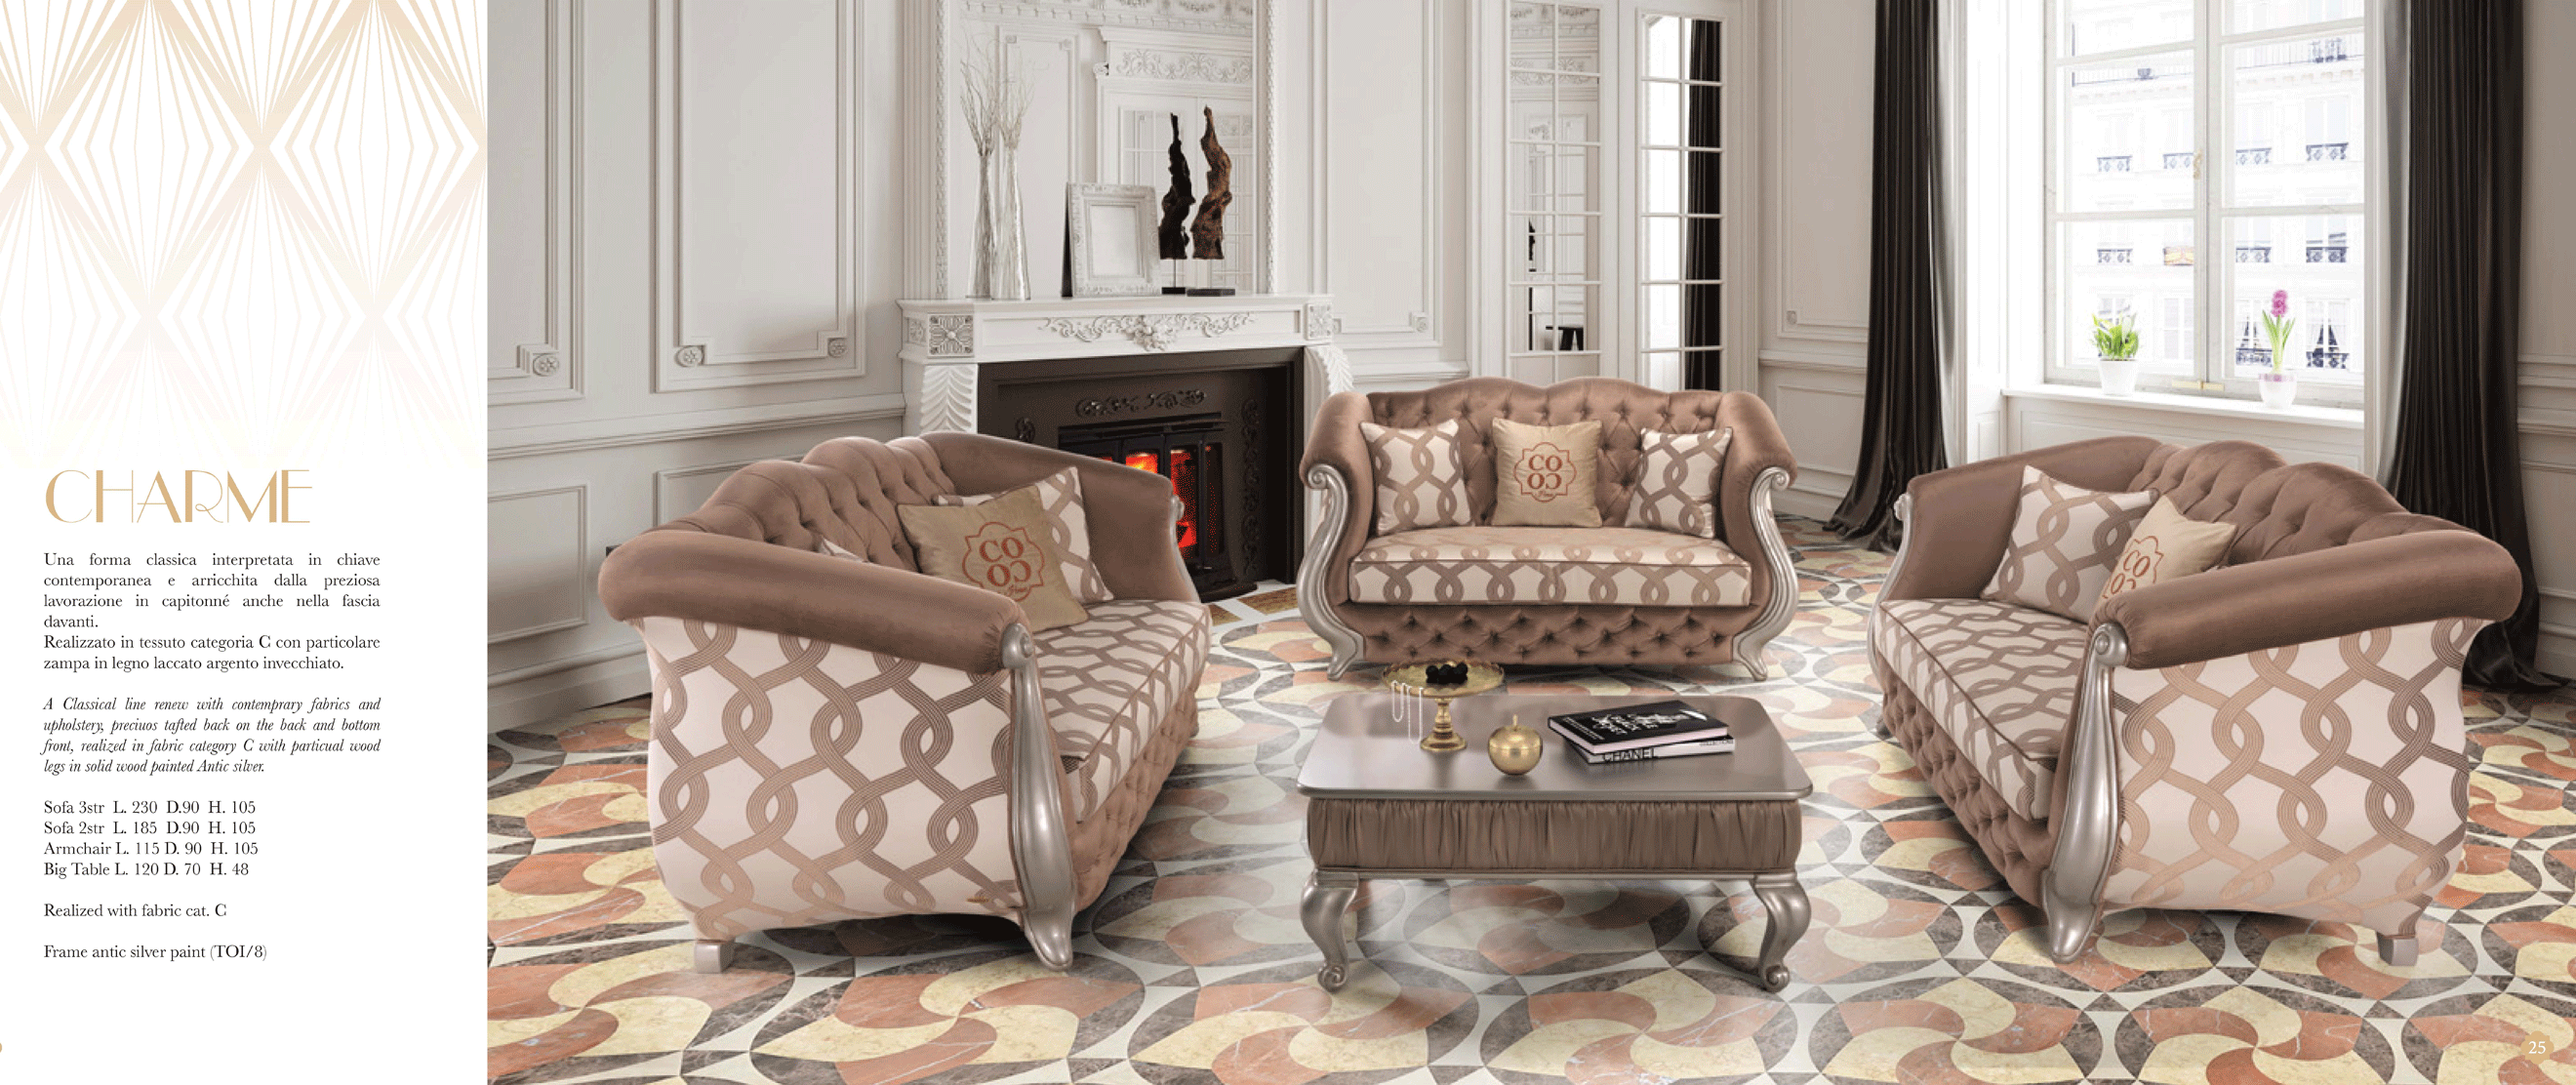 Living Room Furniture Sofas Loveseats and Chairs Charme